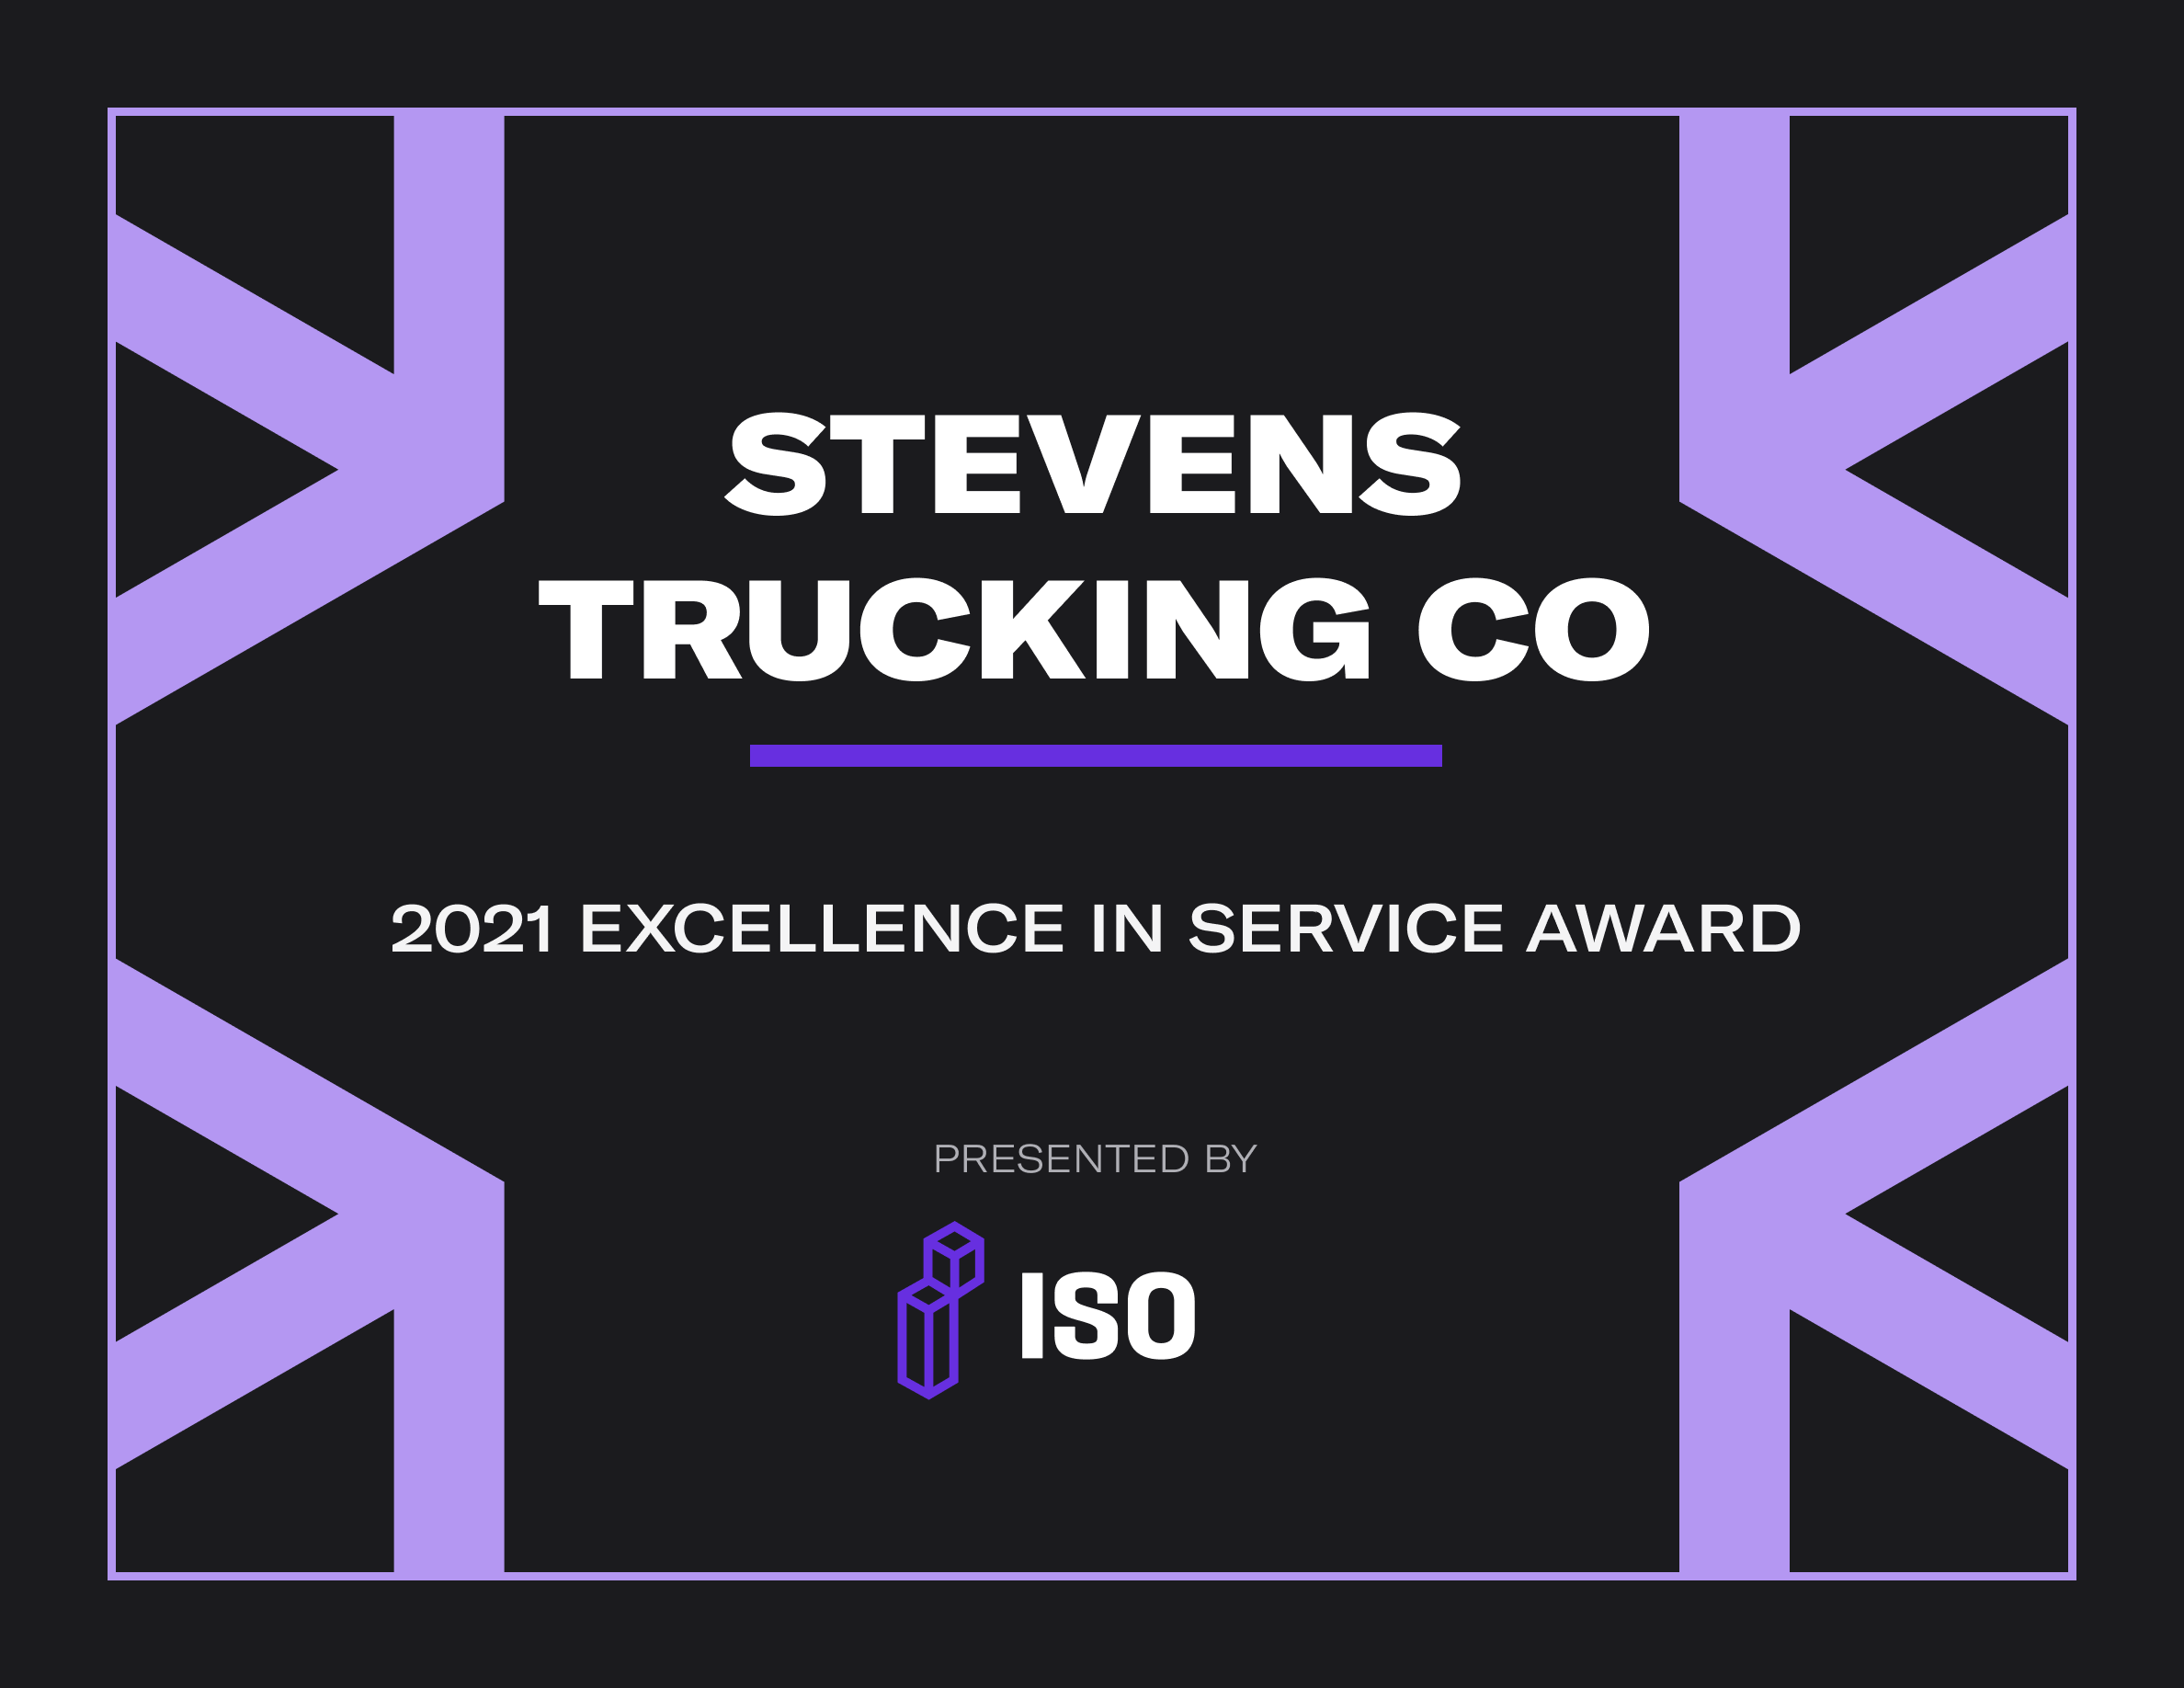 Best Trucking Companies To Work For Image 2 - Stevens Trucking